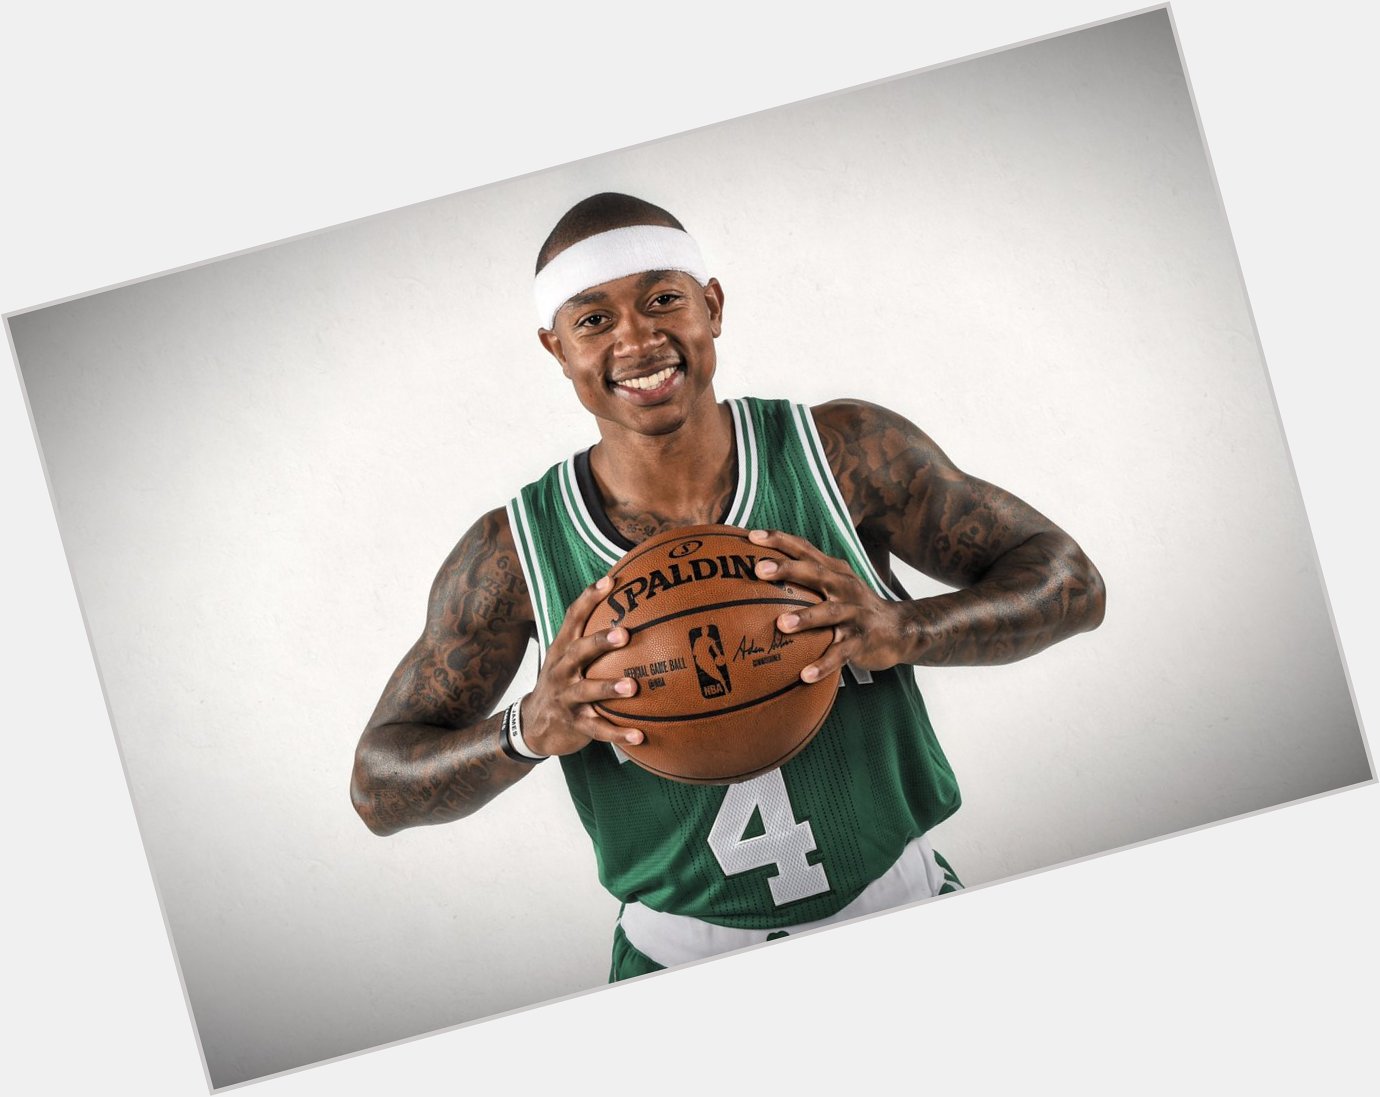 Join us in wishing Isaiah_Thomas of the celtics a HAPPY 28th BIRTHDAY! 